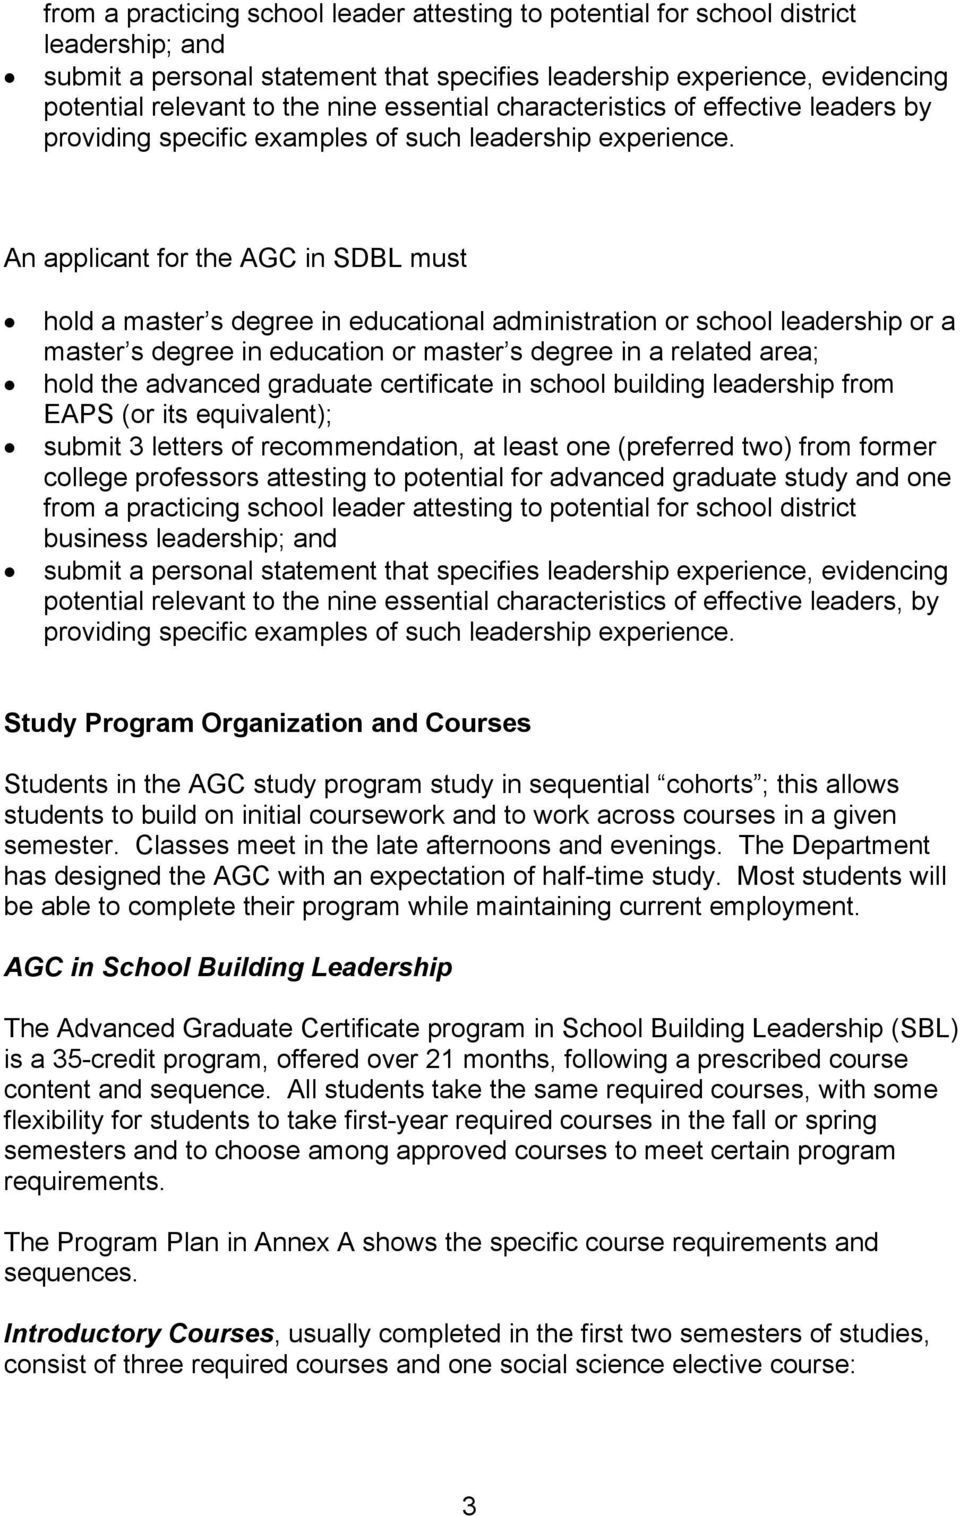 An applicant for the AGC in SDBL must hold a master s degree in educational administration or school leadership or a master s degree in education or master s degree in a related area; hold the